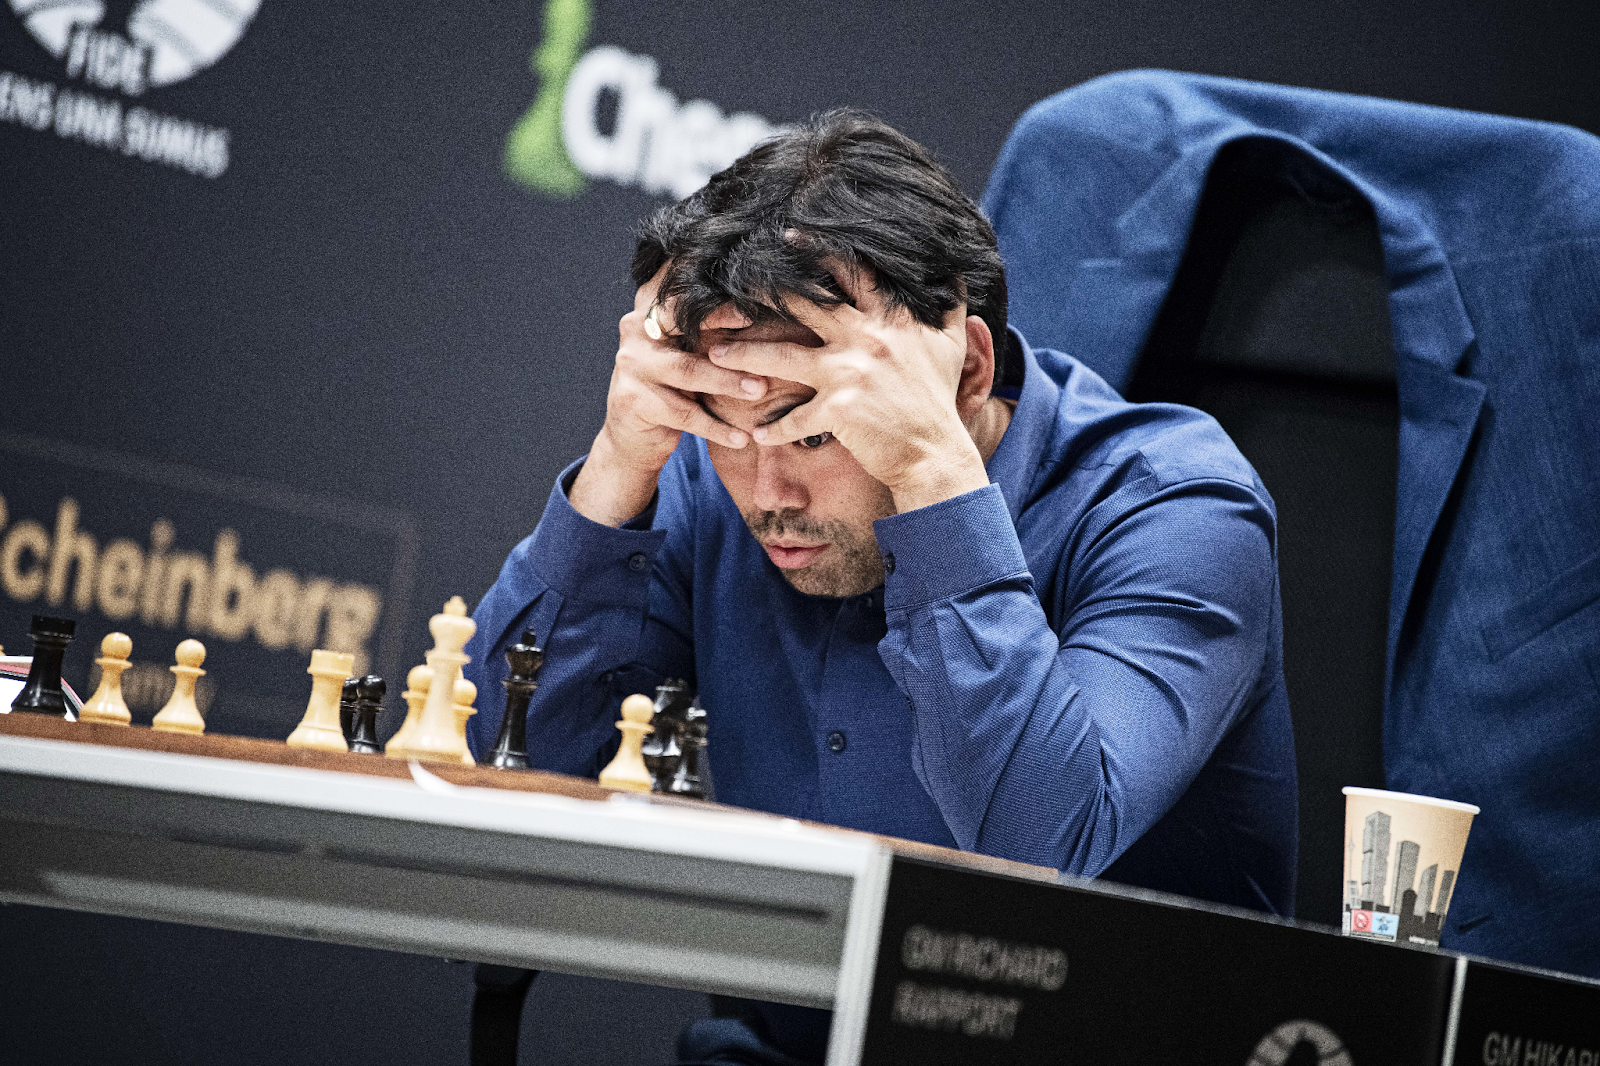 Nepomniachtchi defeated Firouzja in Round 4 of the FIDE Candidates